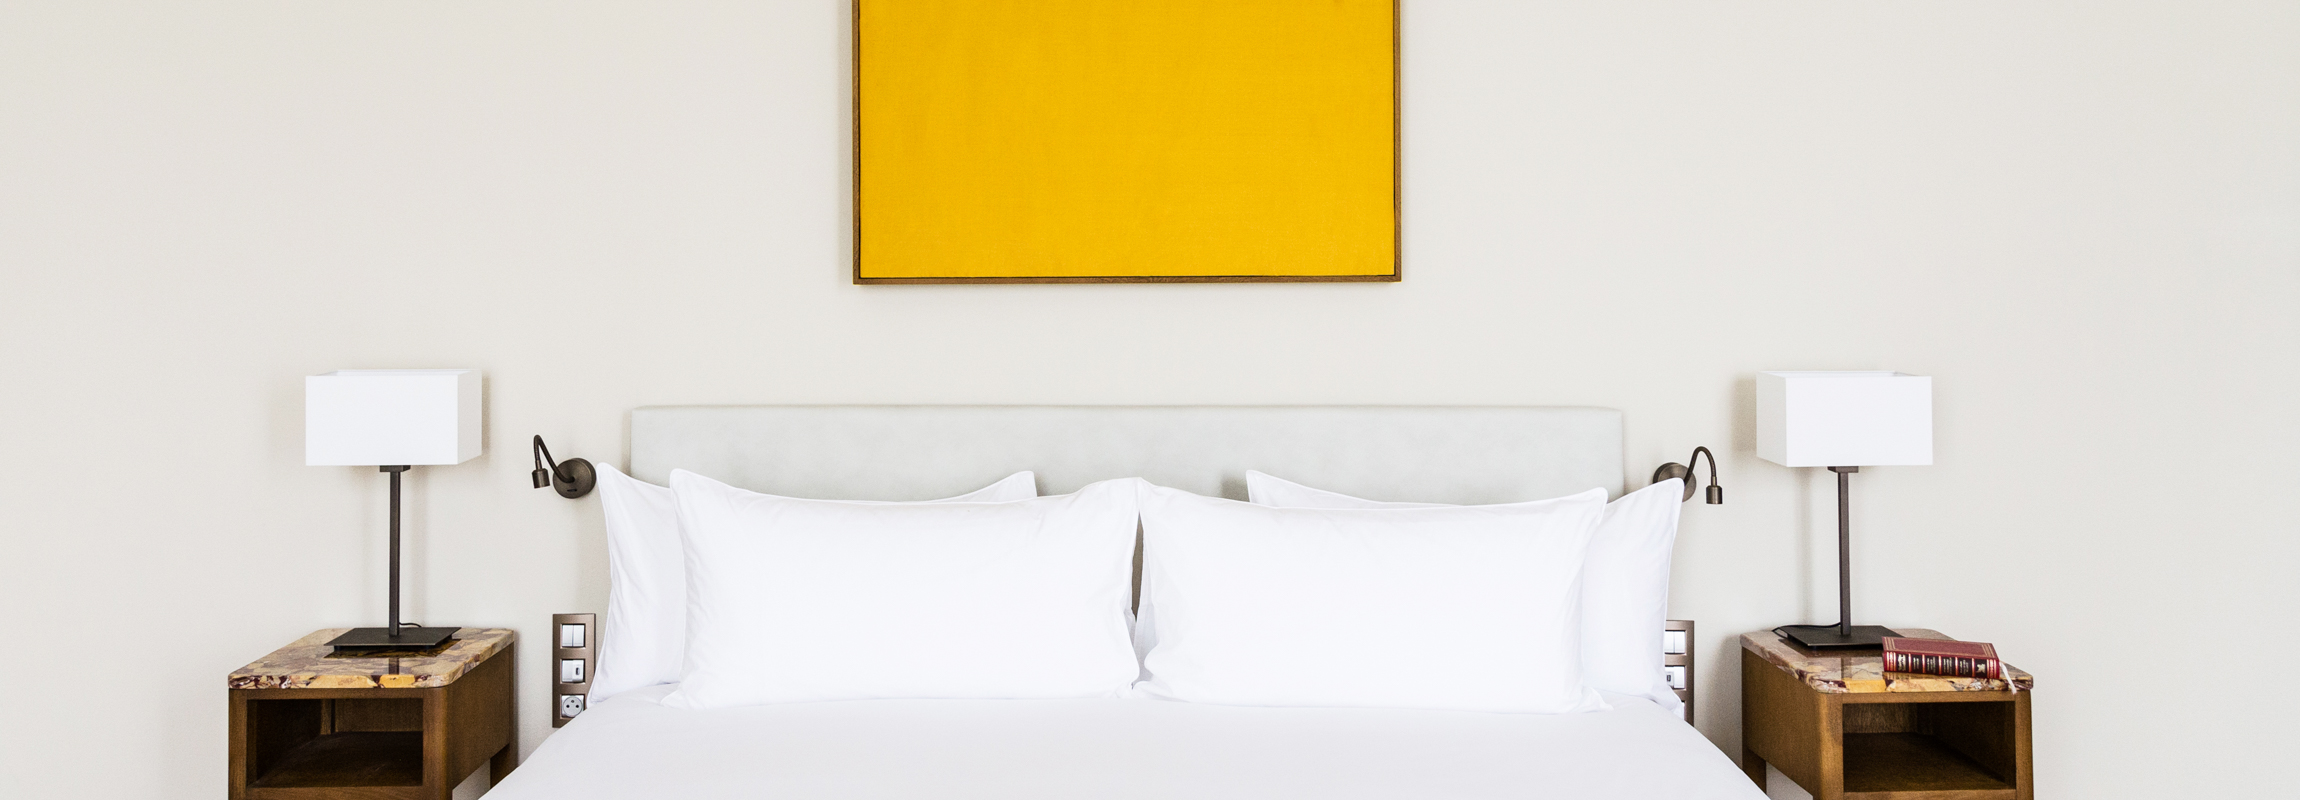 The beds at hotel Chateau de Montcaud are adorned by a silk panel, a symbolic reminder of the chateau's origins: May your dreams be made of silk should as they accompany your nights in Provence, Southern France.